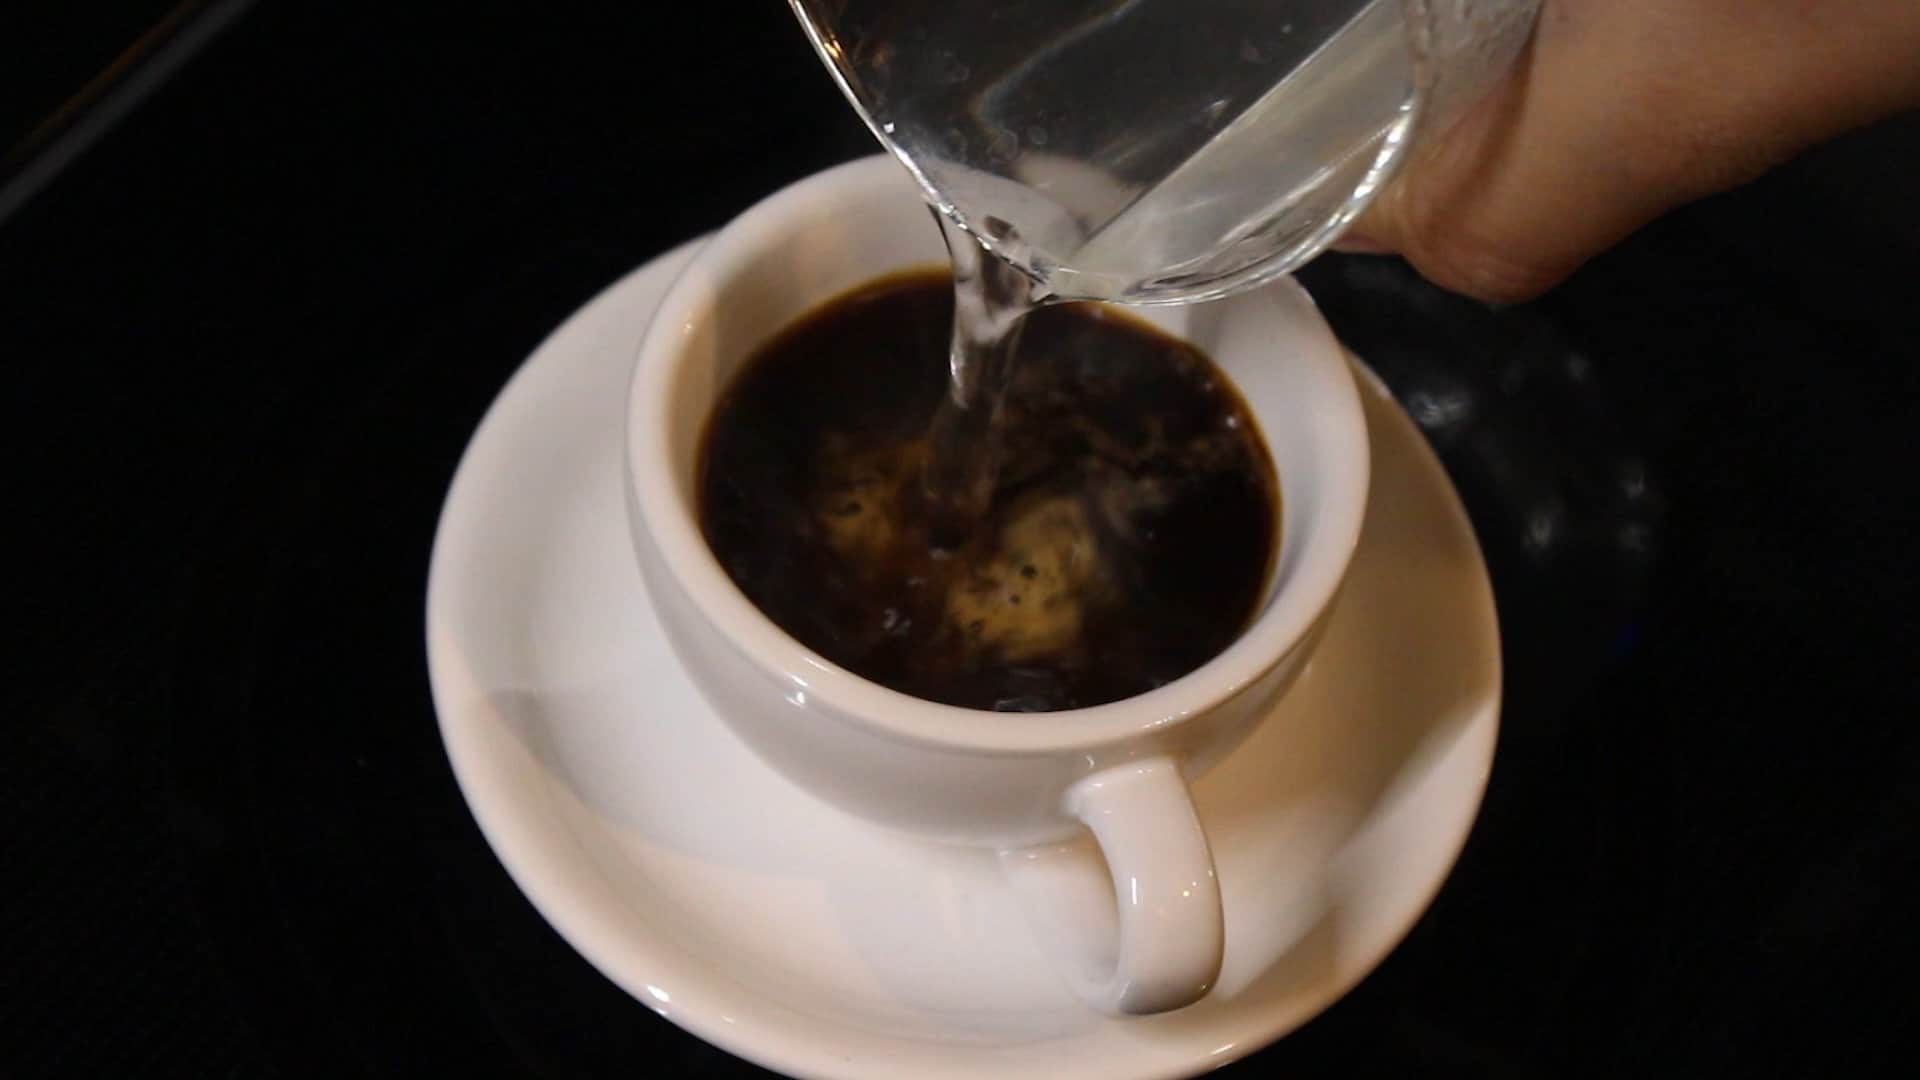 pouring warm water into the cup